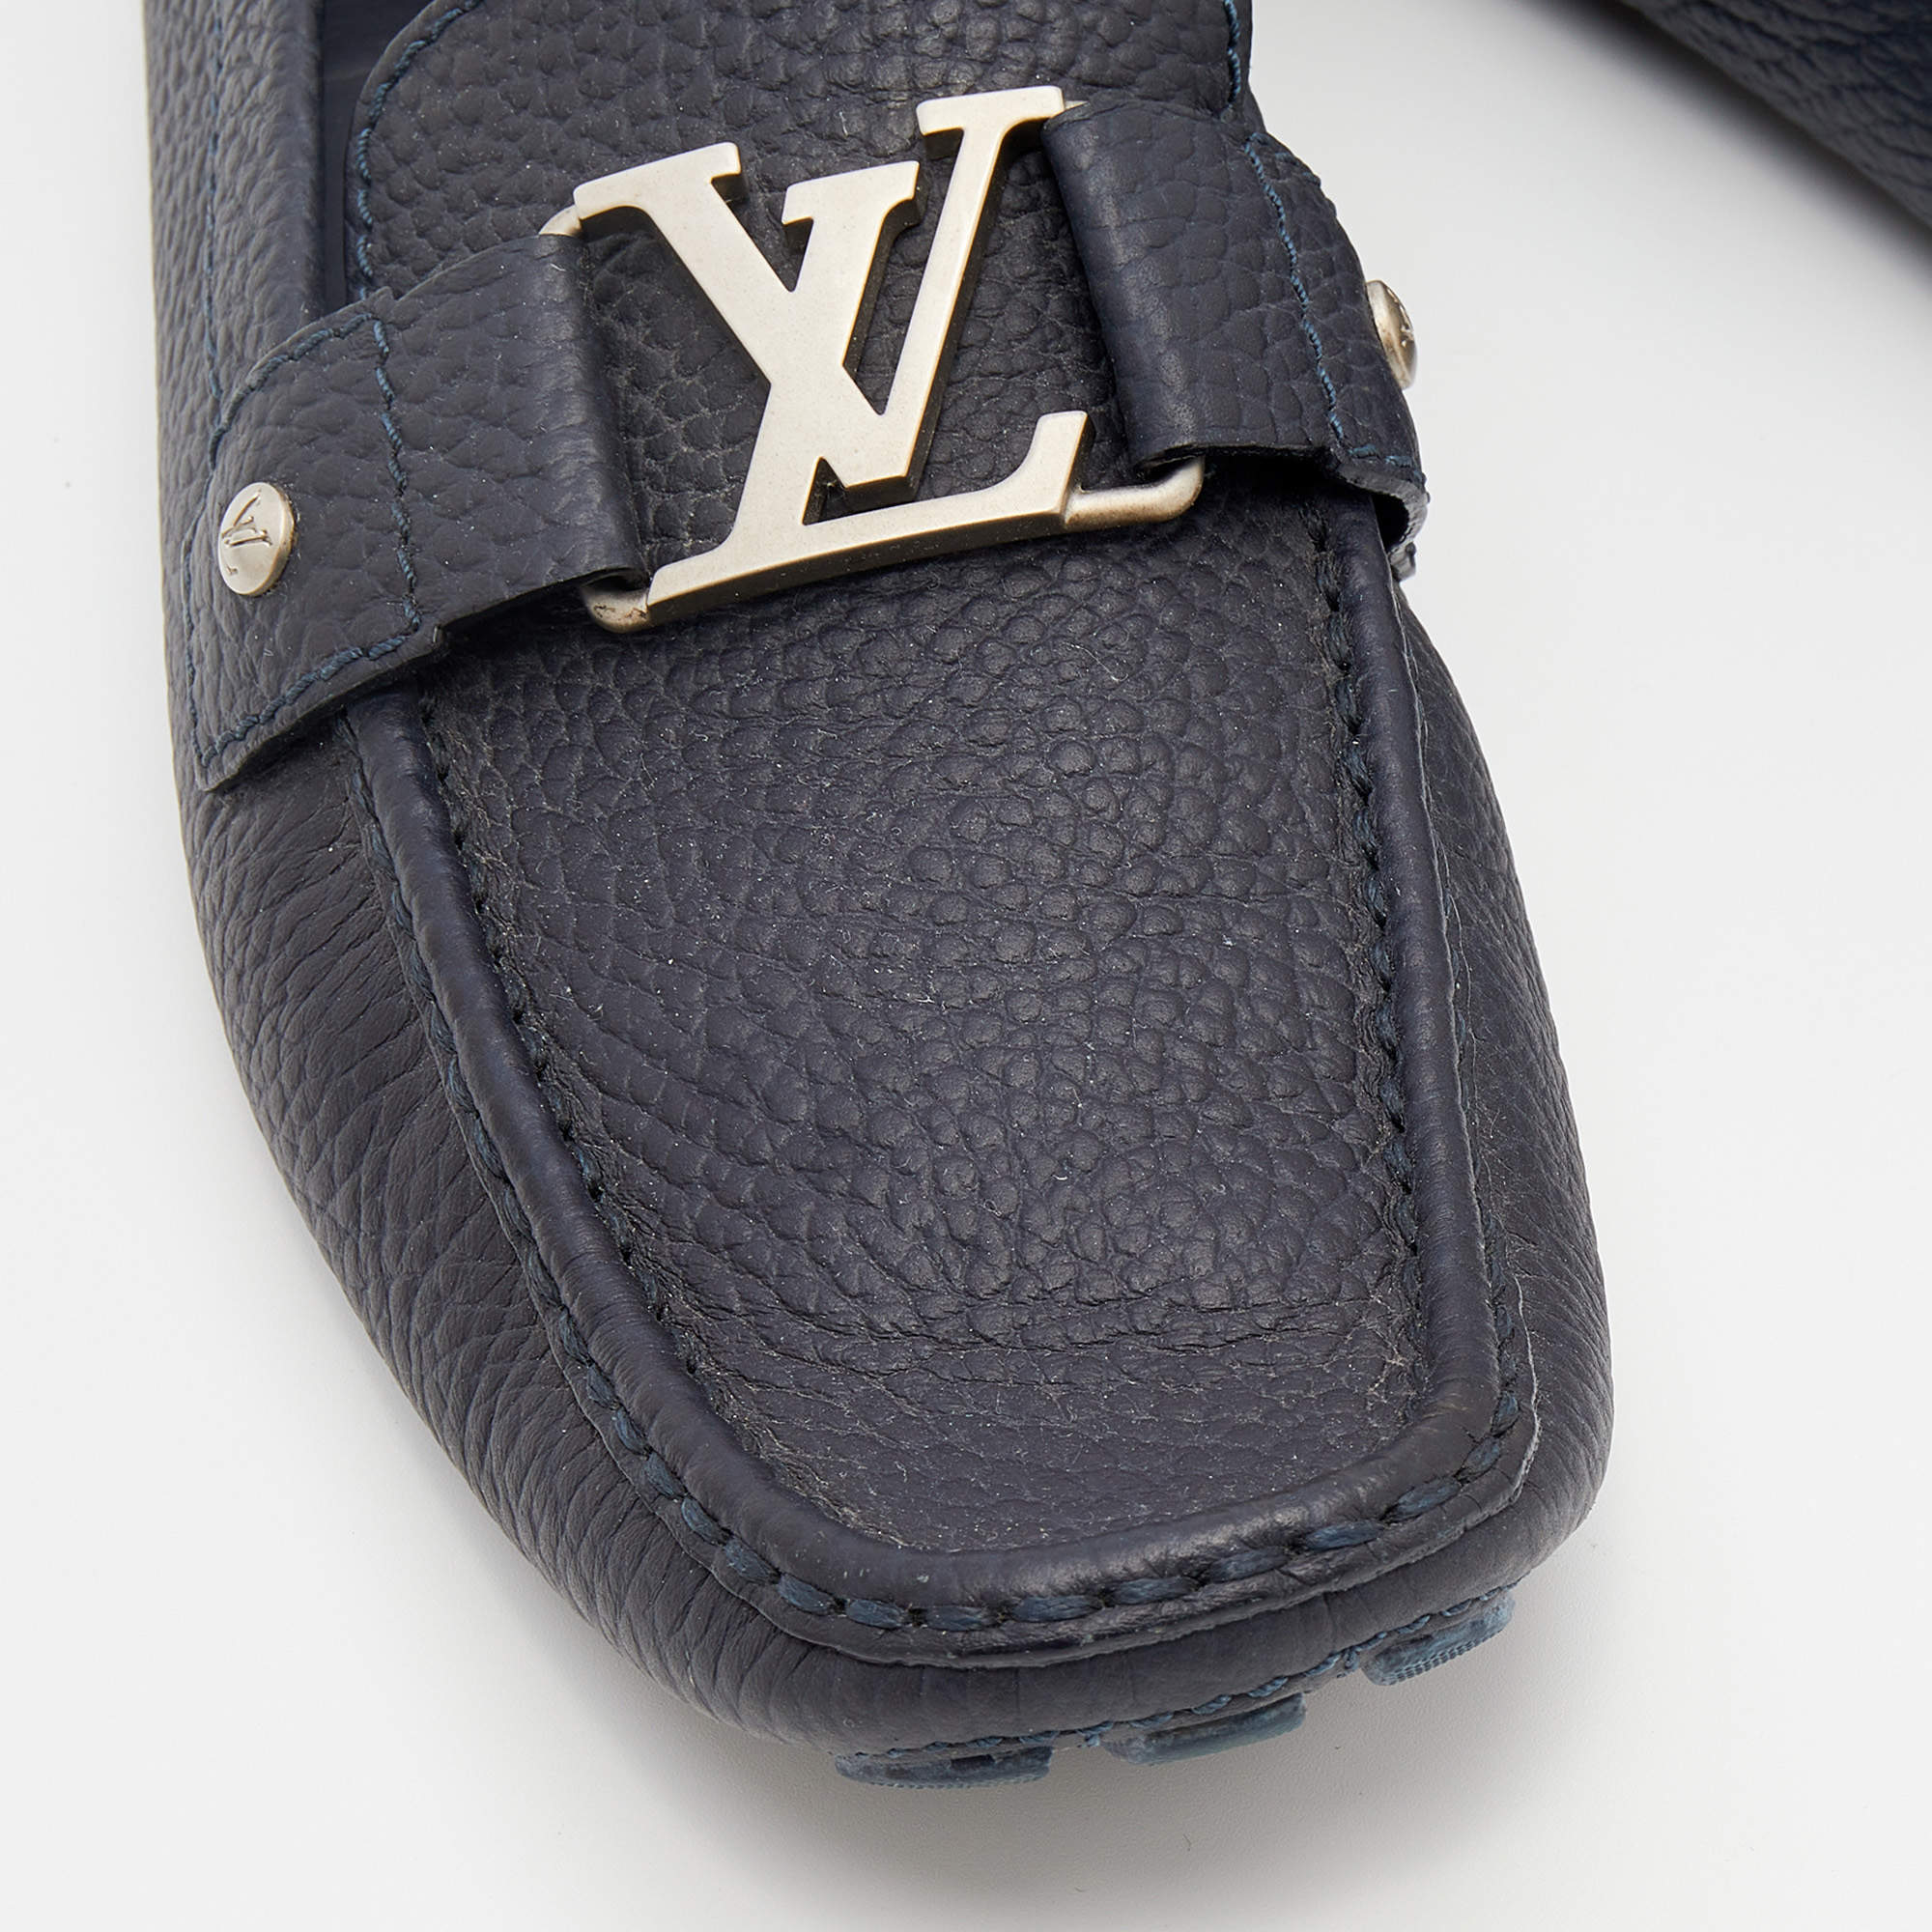 LOUIS VUITTON* Montaigne Leather Loafers - Navy Blue - Size 11 US